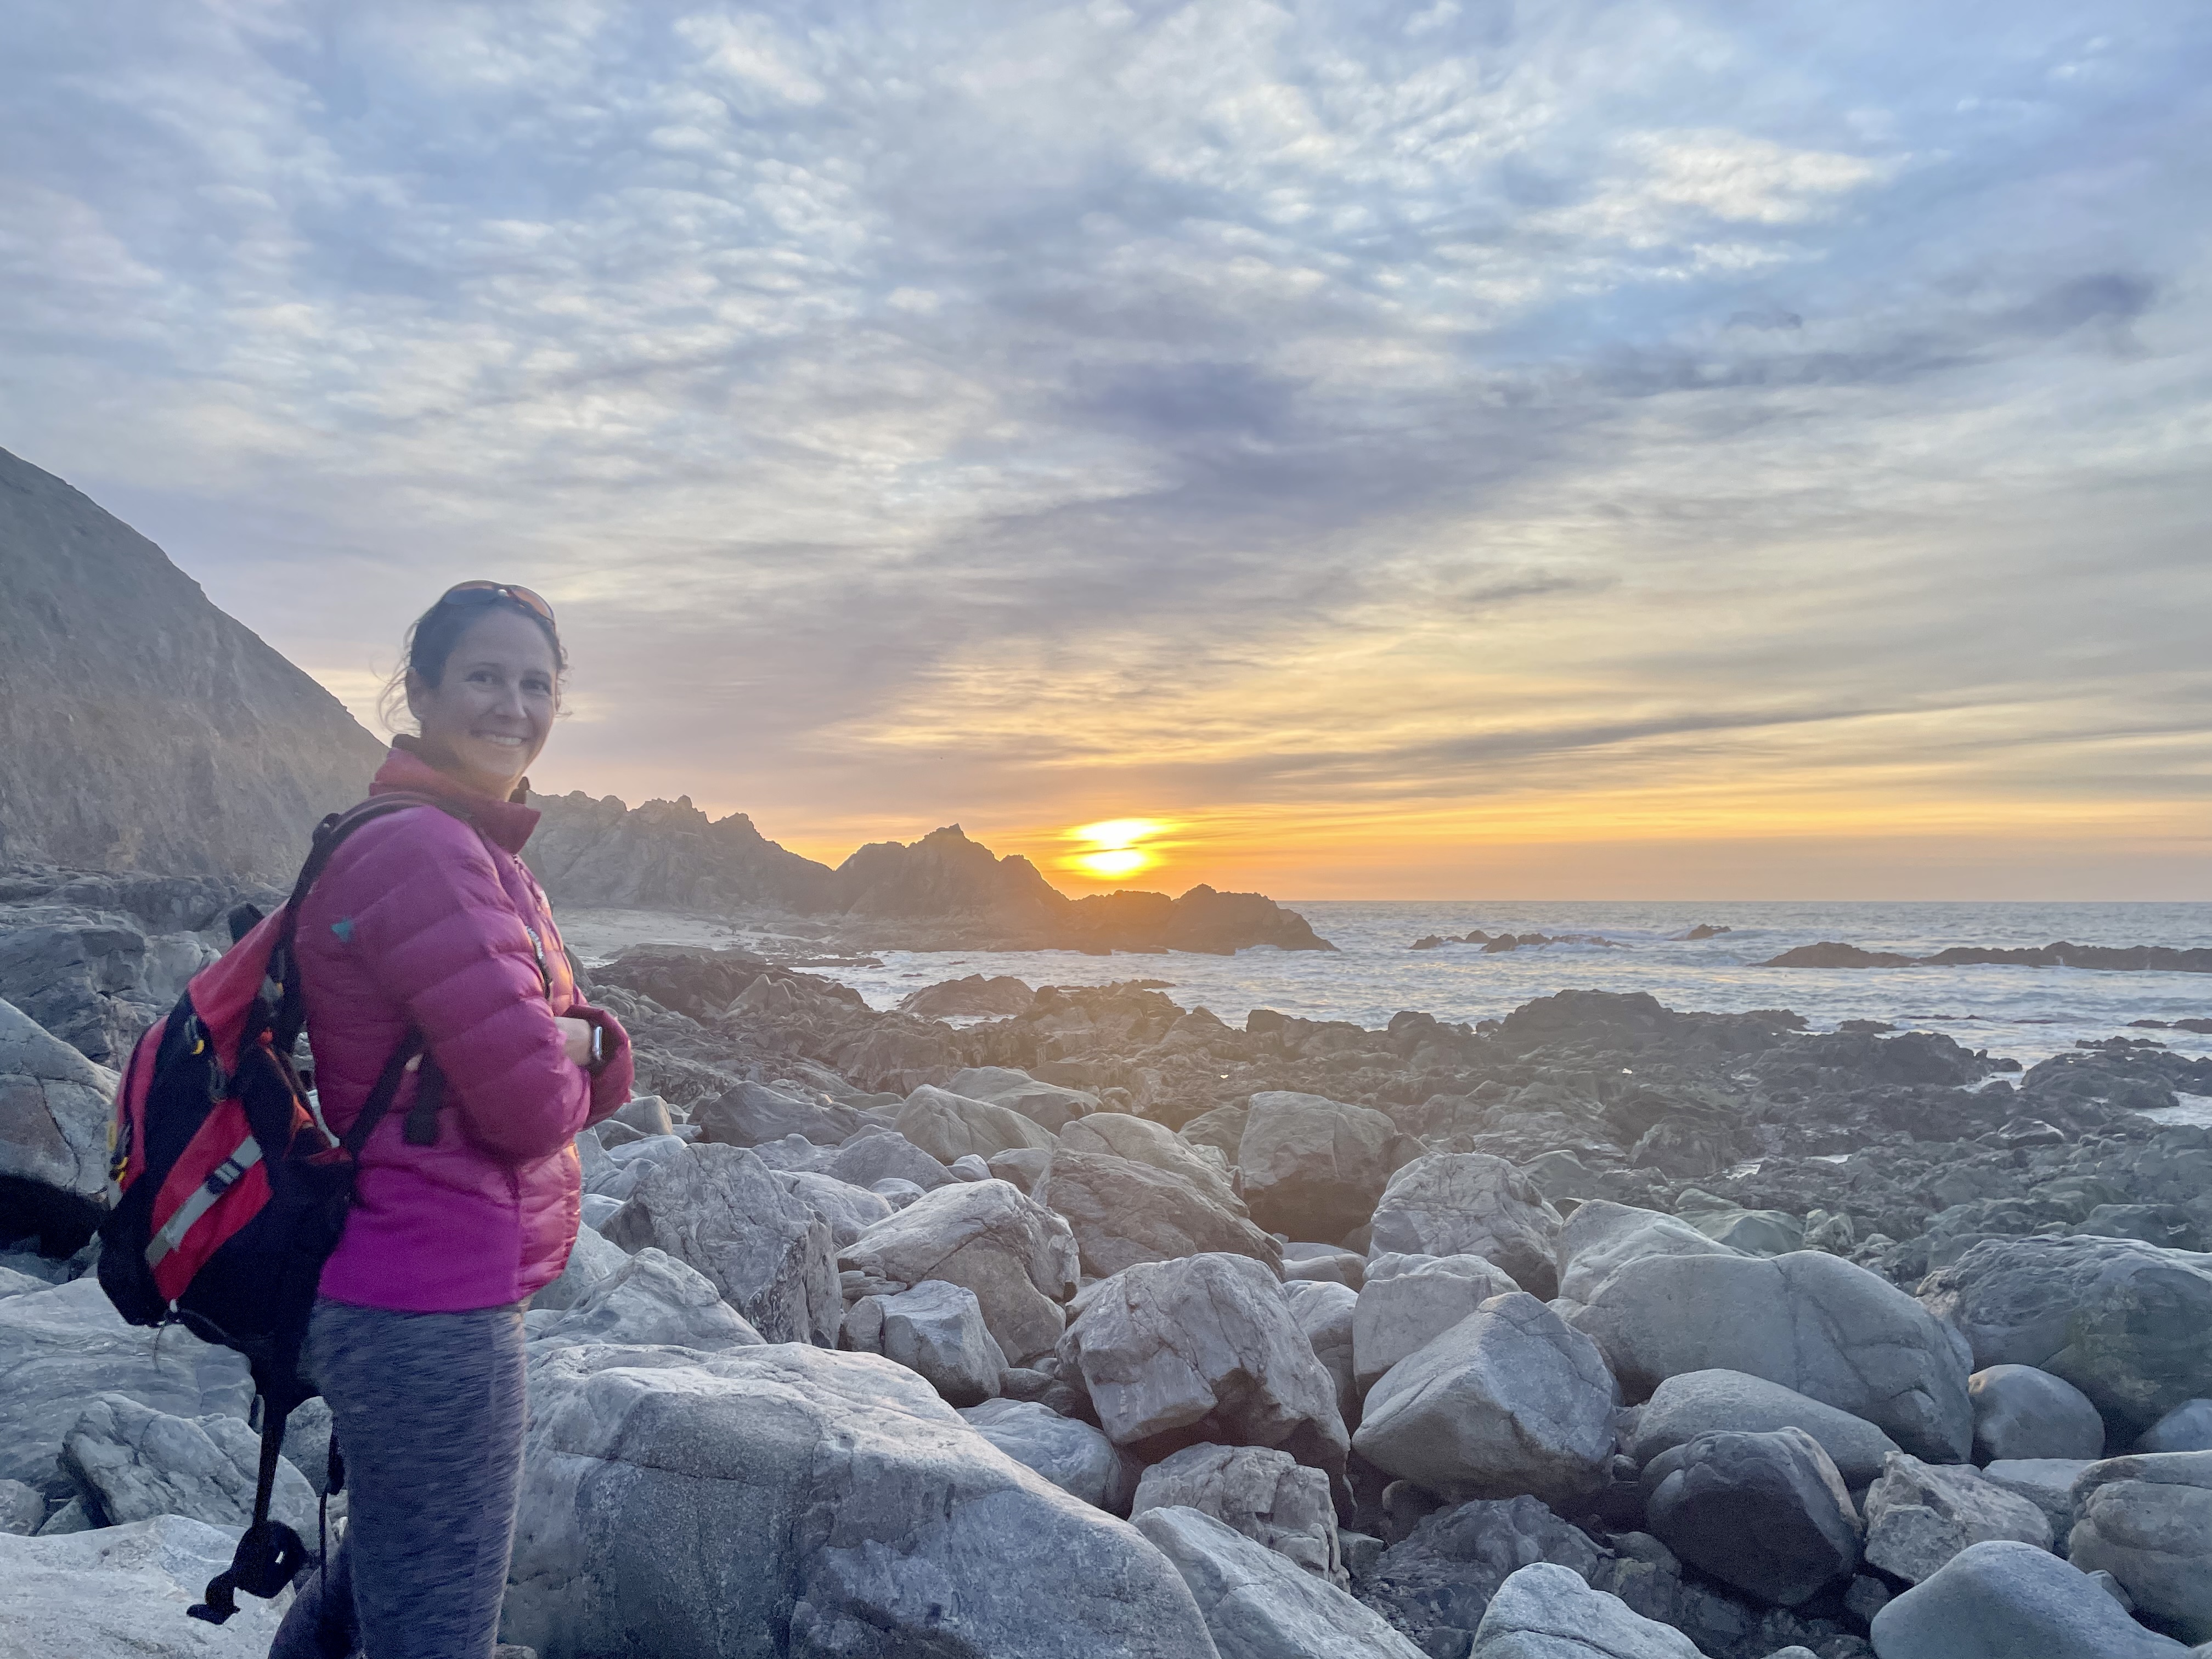 A woman stands on a rocky beach at sunset